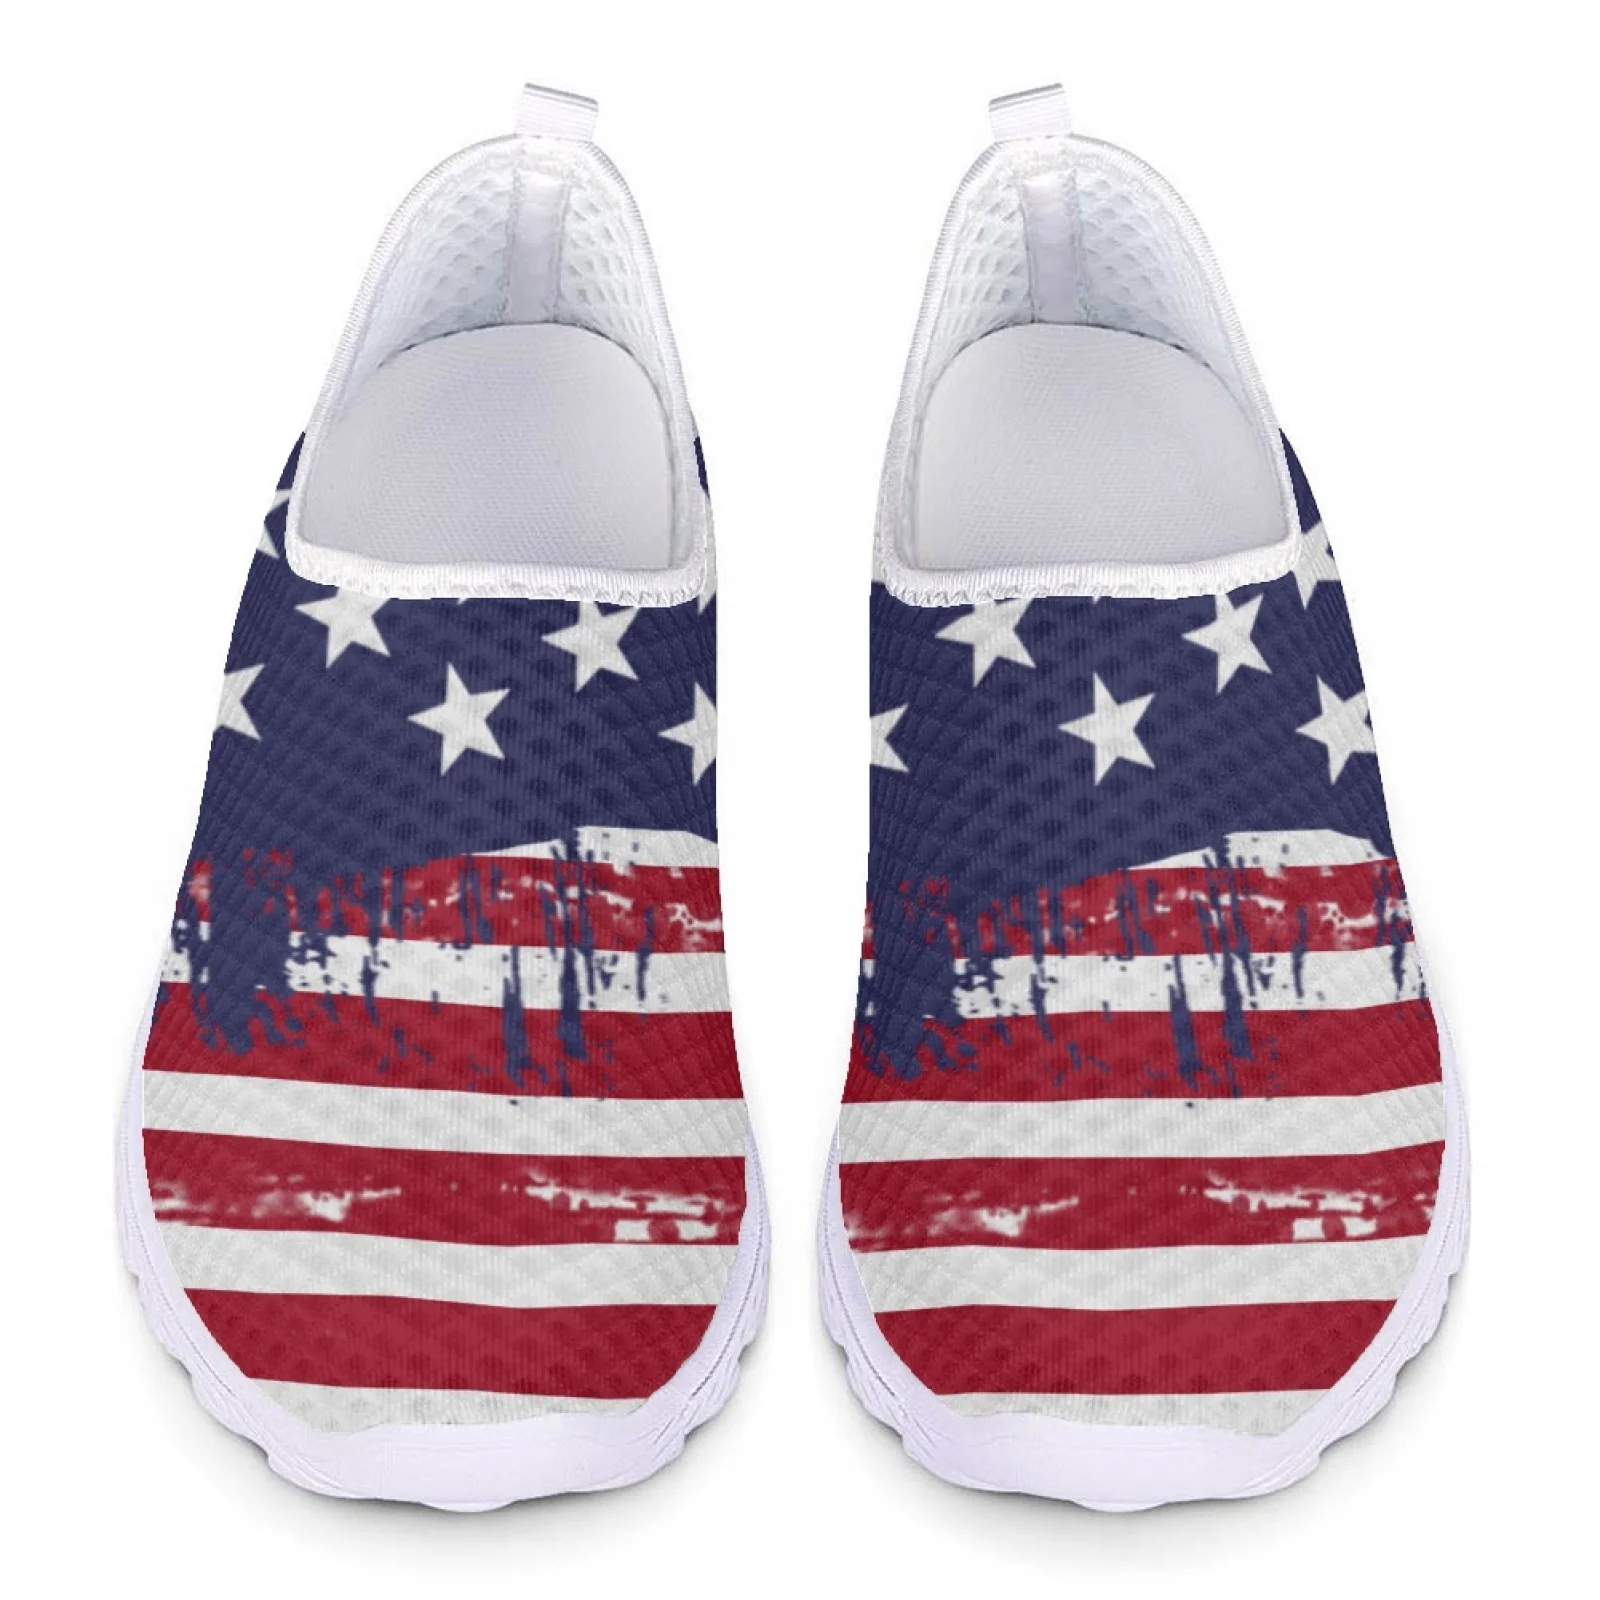 

Belidome Women Sneakers American Flag Brand Design Slip on Light Mesh Walking Shoes Summer Breathable Flats Shoes Zapatos Planos